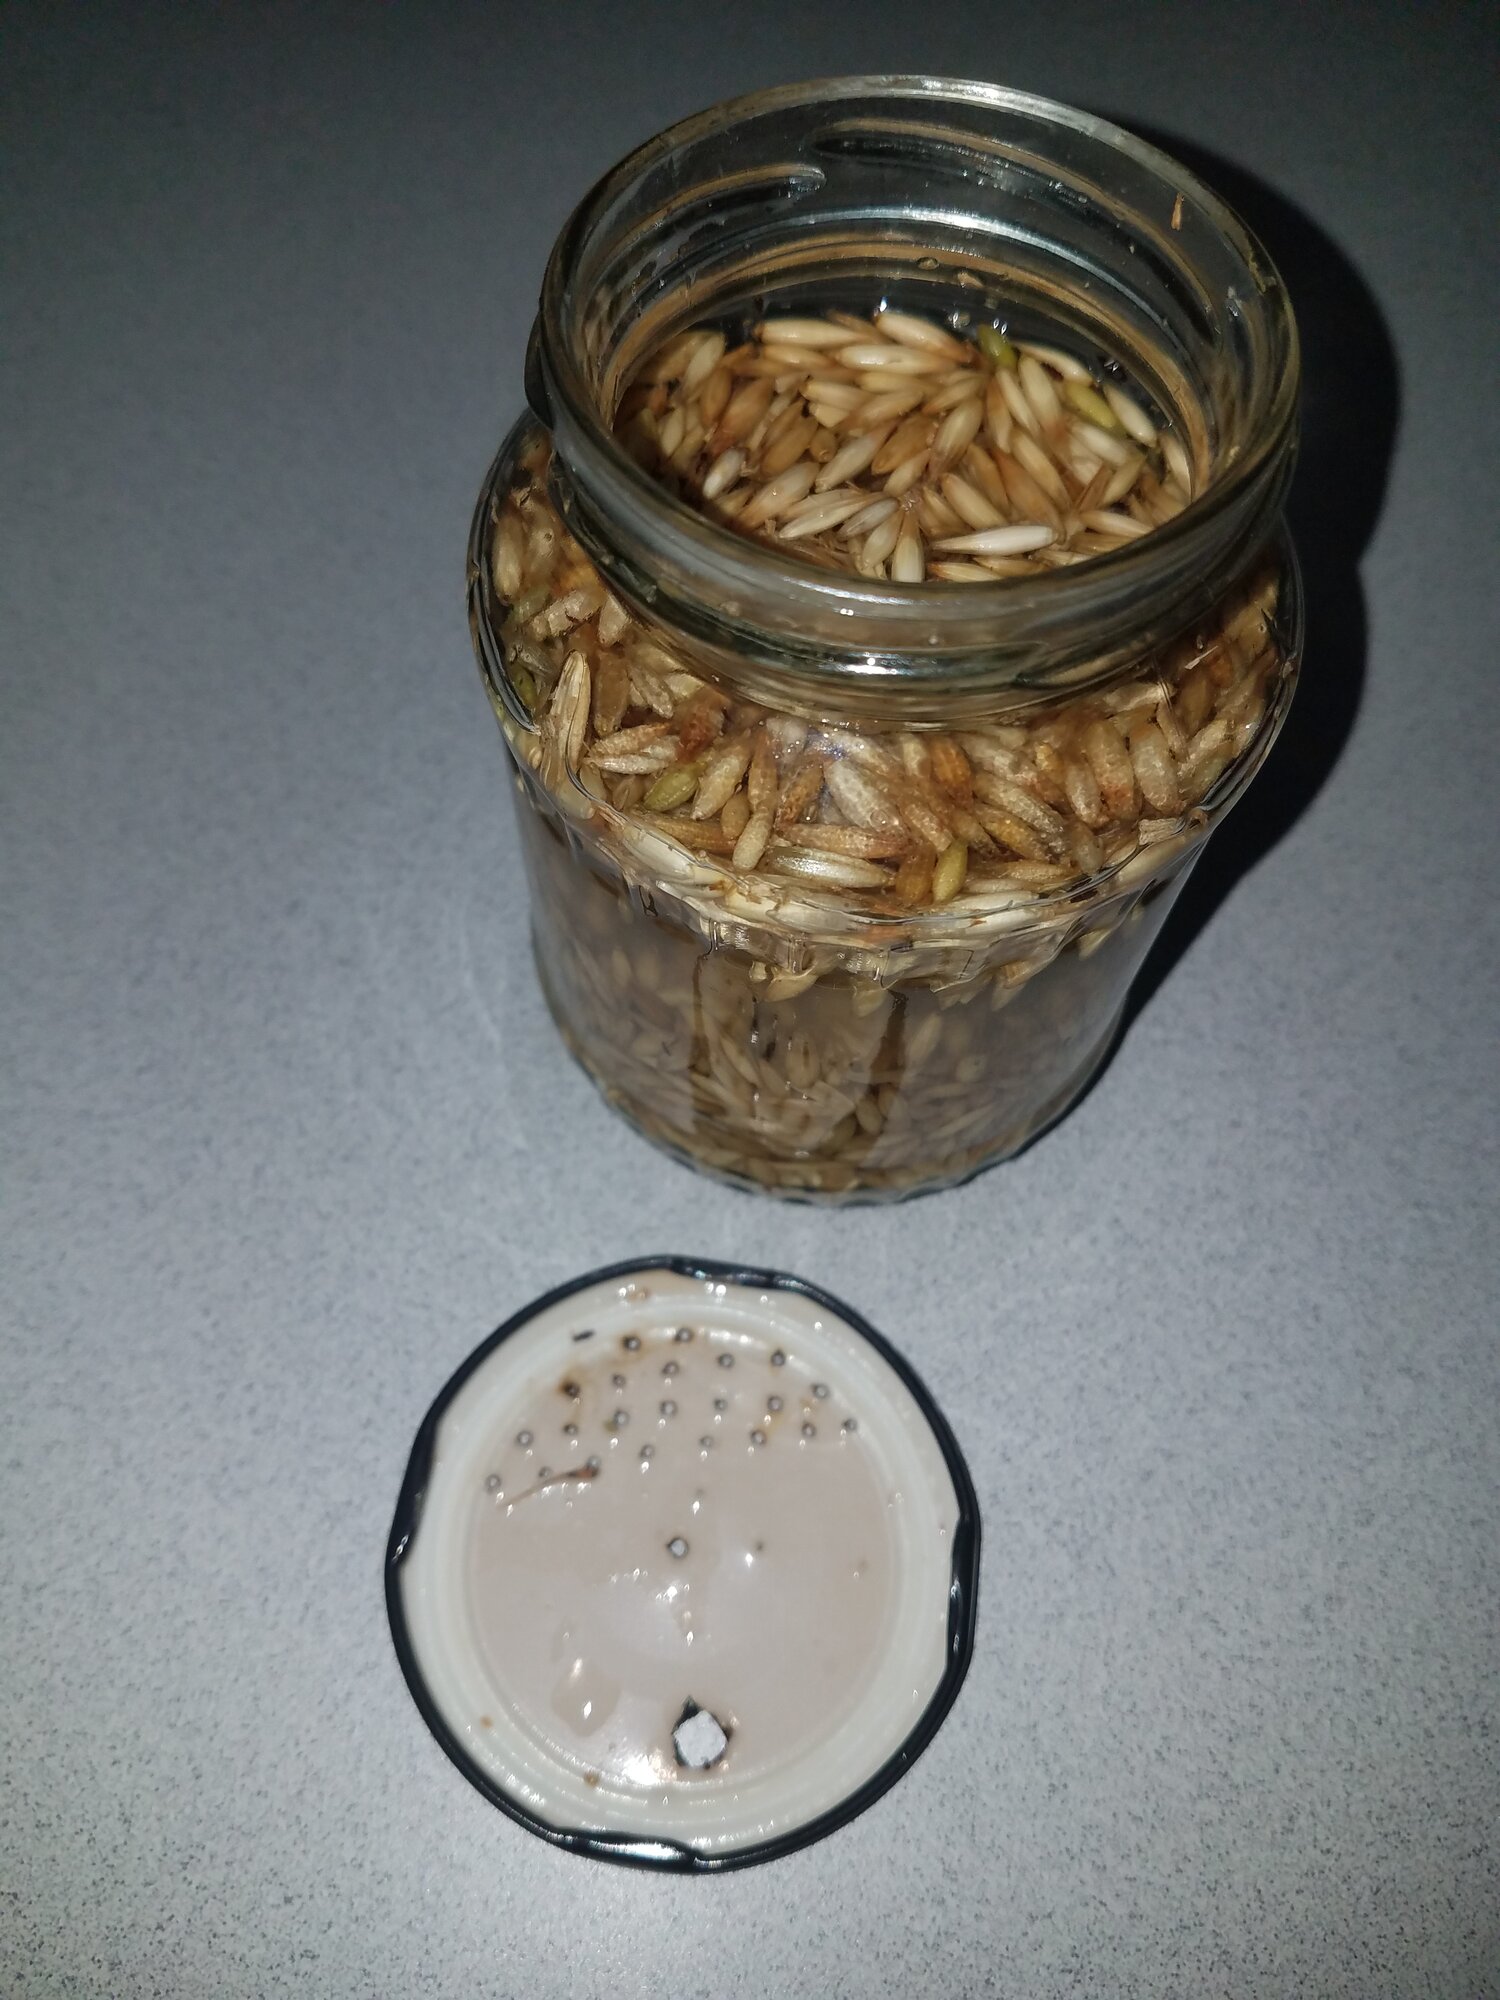 Another trial with Oats in a sprouting glass